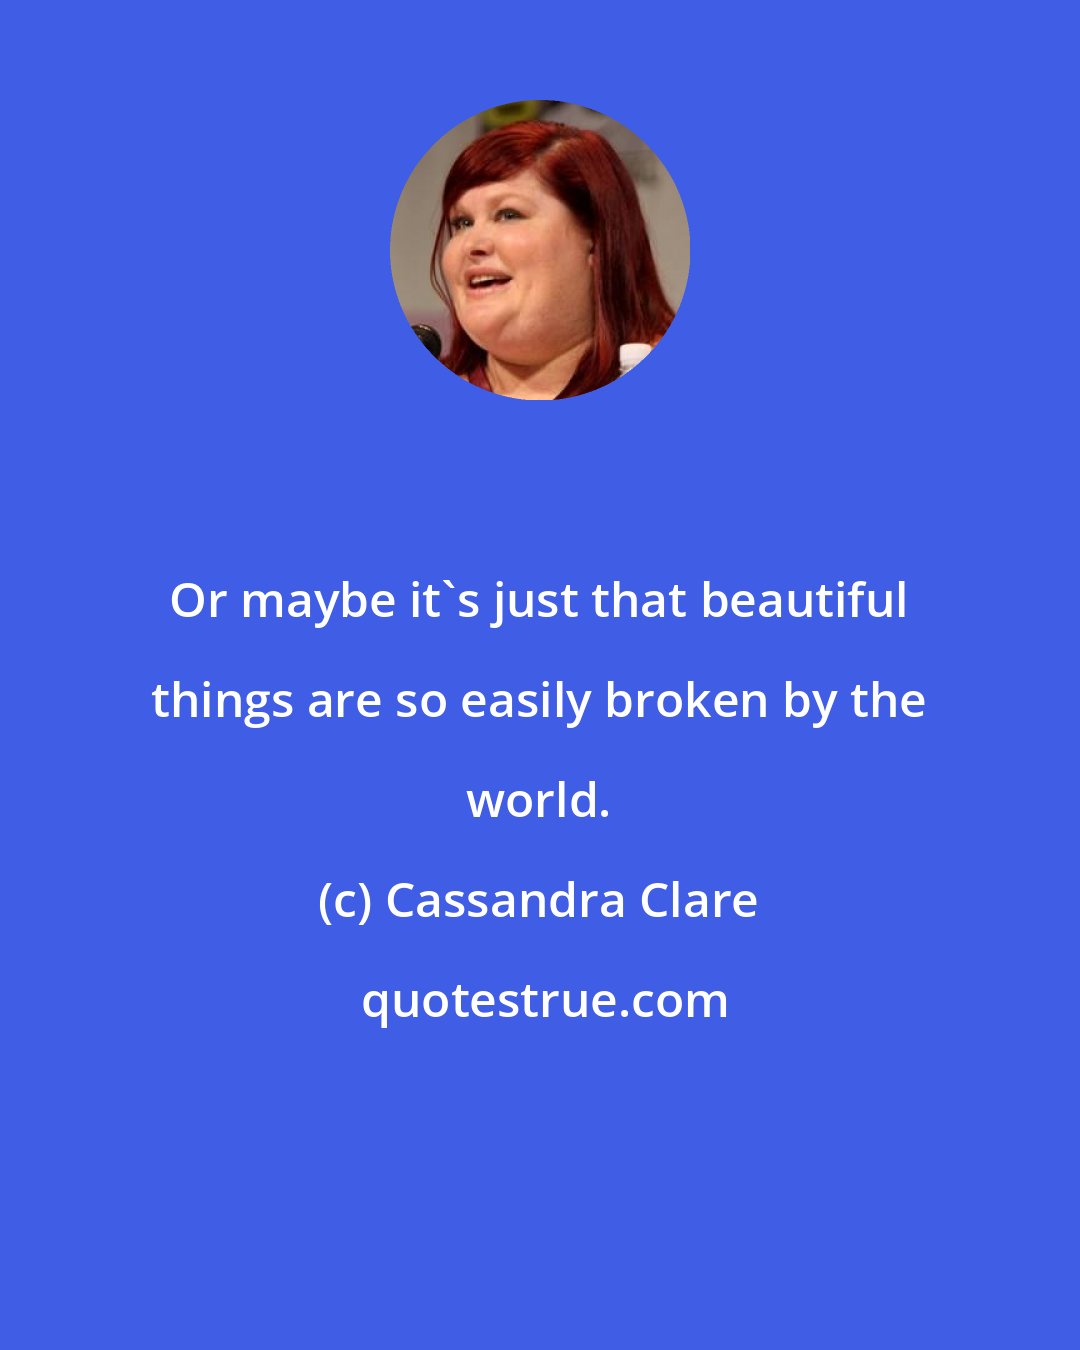 Cassandra Clare: Or maybe it's just that beautiful things are so easily broken by the world.